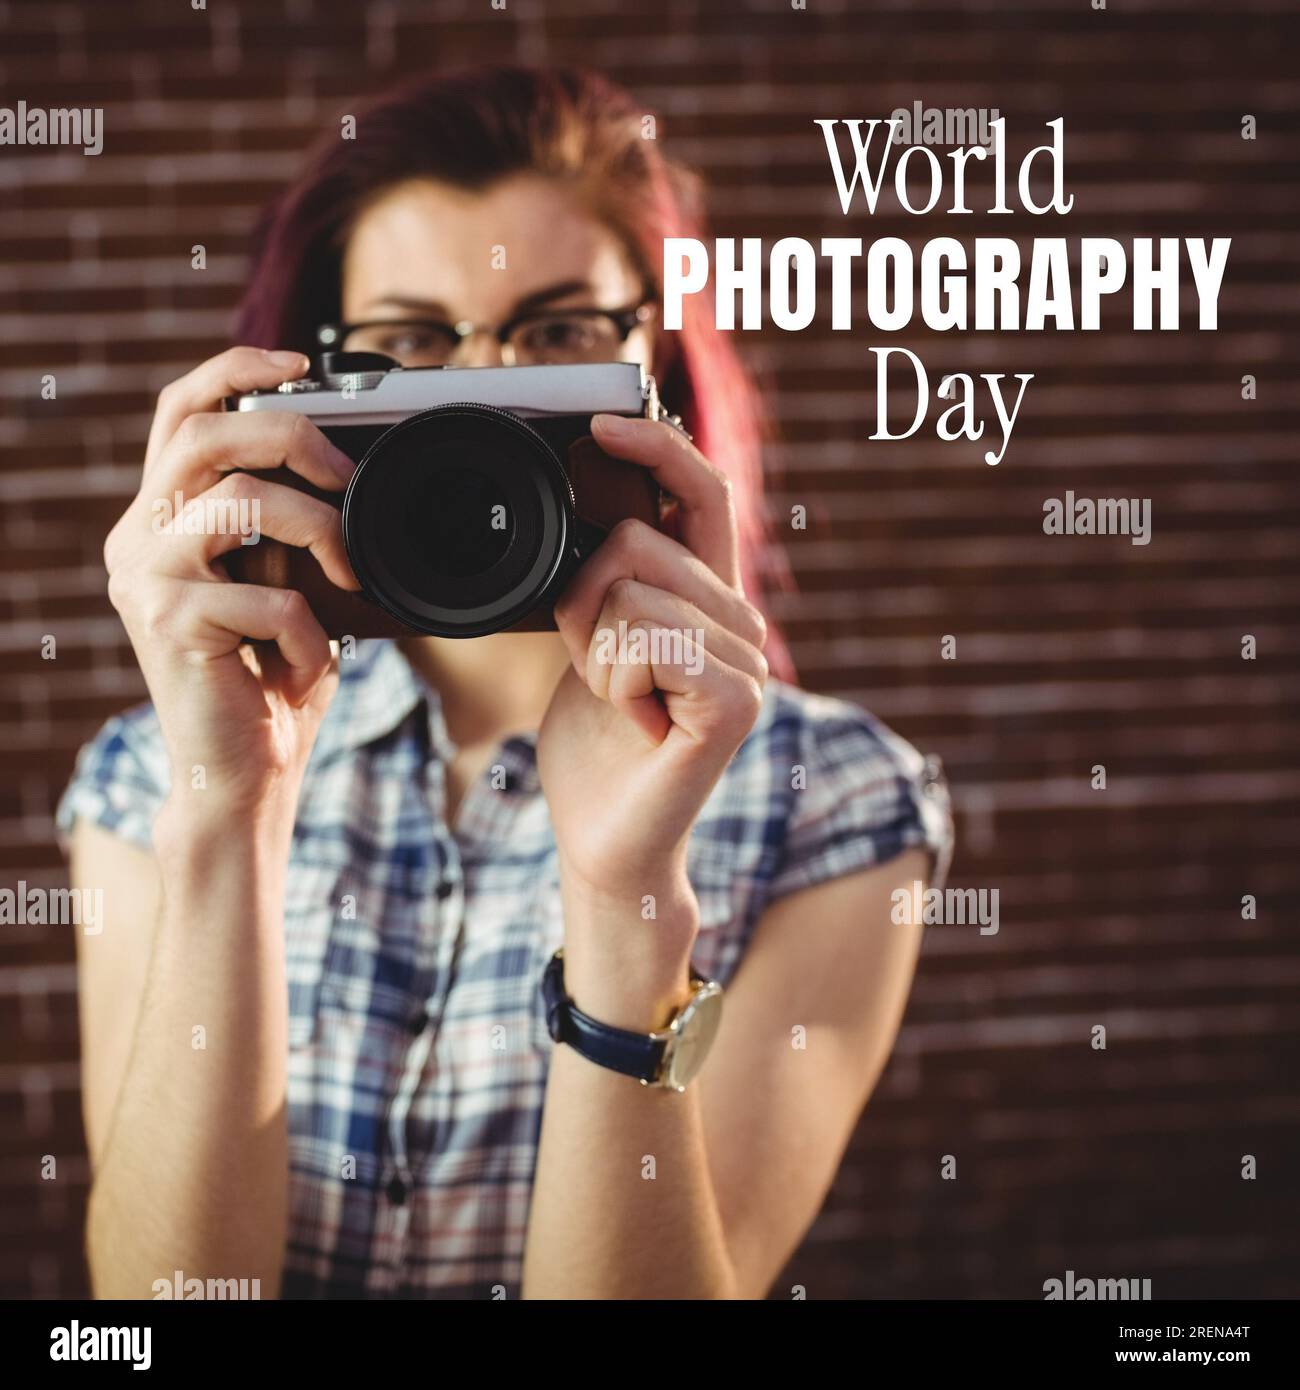 World photography day text in white over caucasian woman in glasses using camera Stock Photo